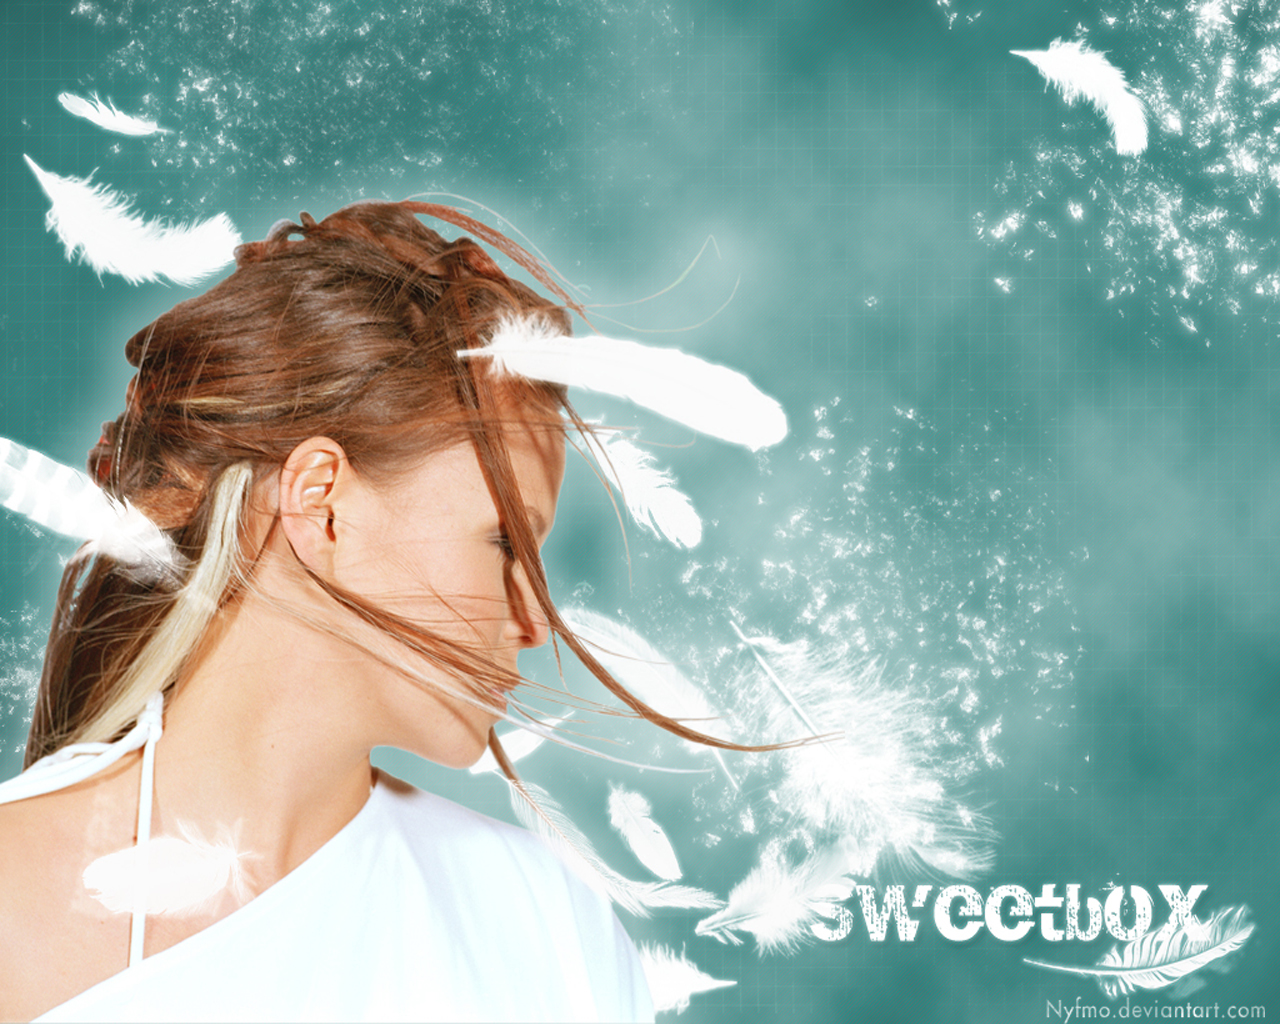 [SweetBox_Feathers_Wallpaper_by_Nyfmo.jpg]